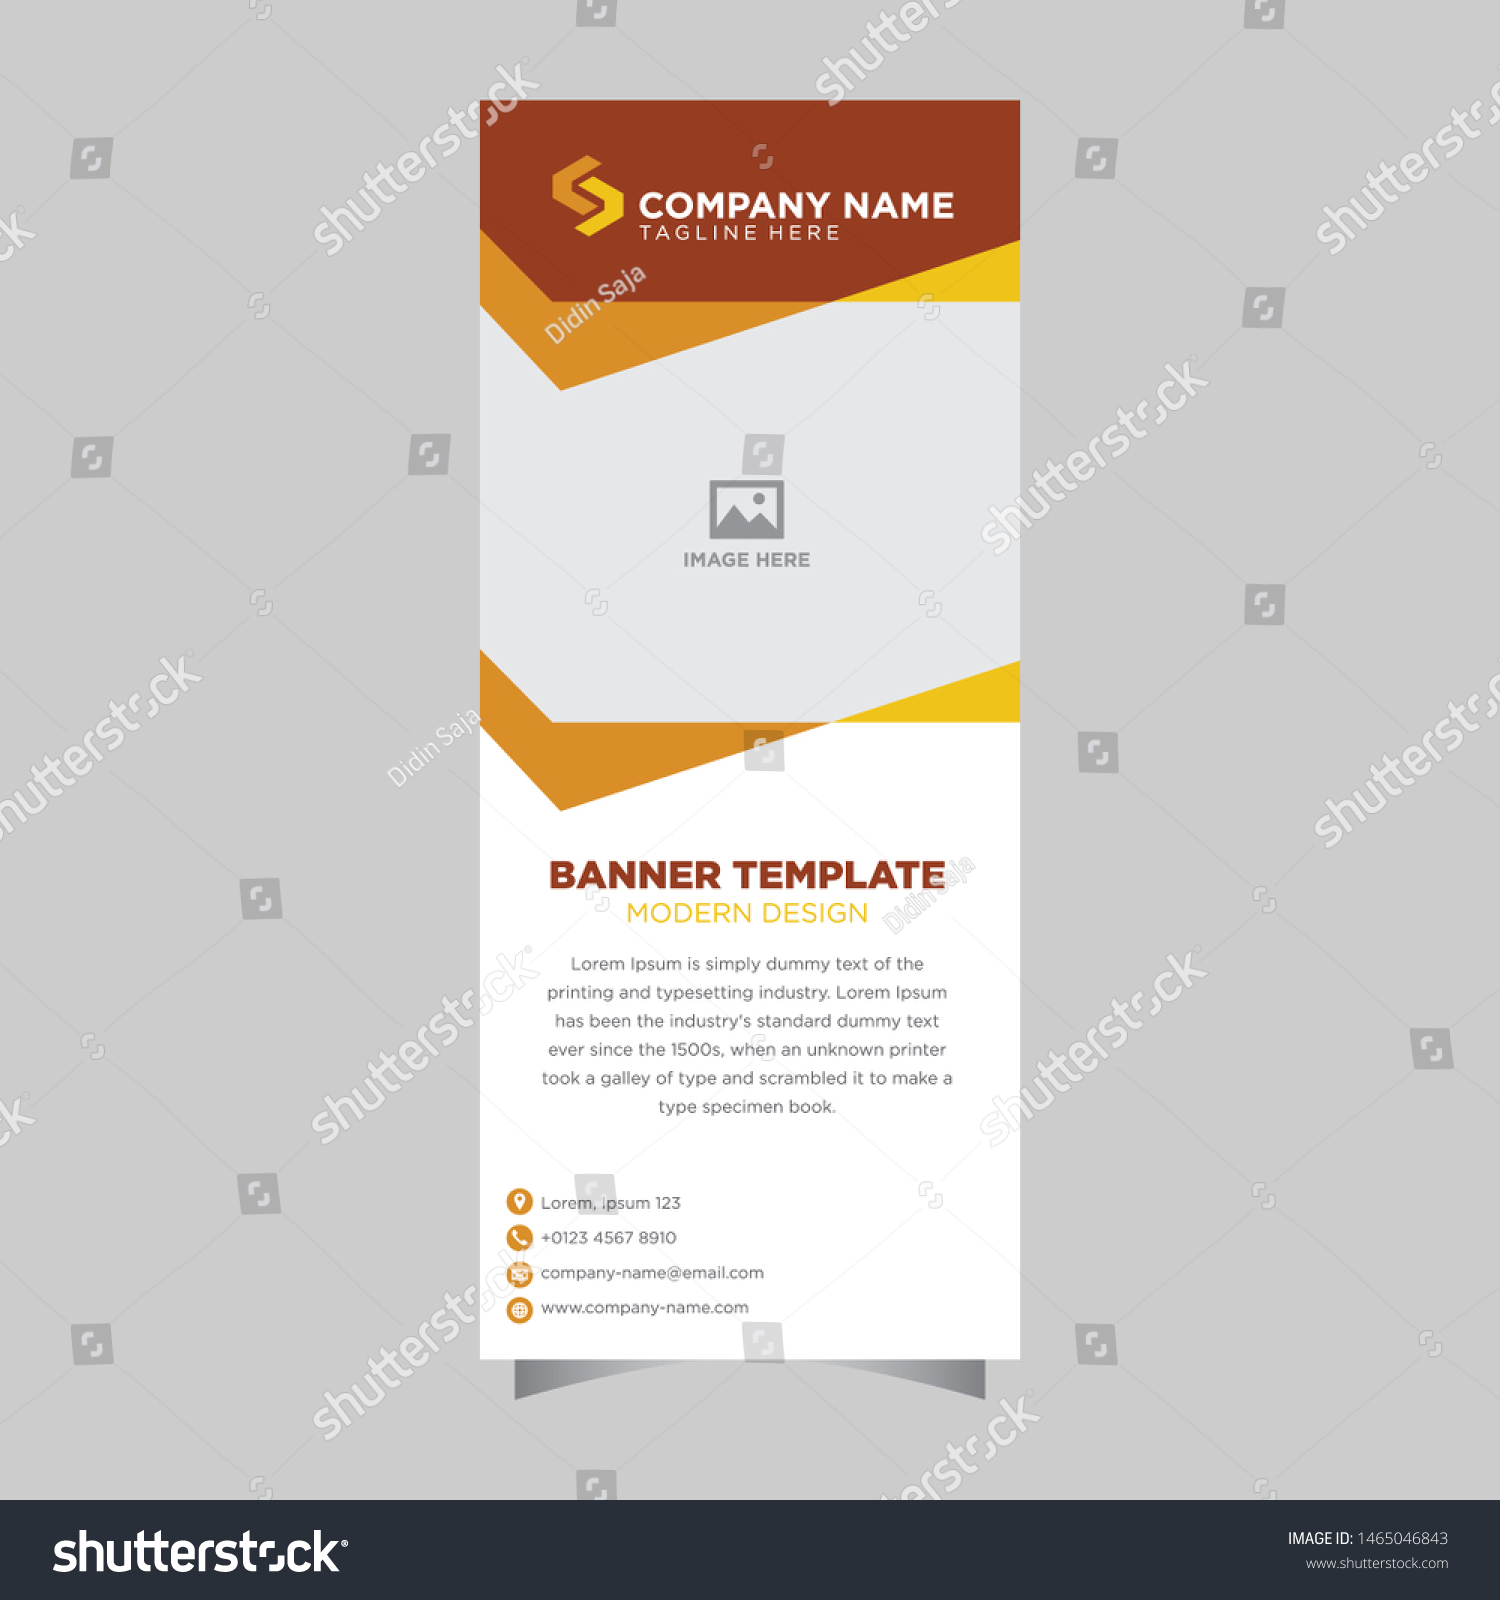 Modern design x banner template simple creative - Royalty Free Stock